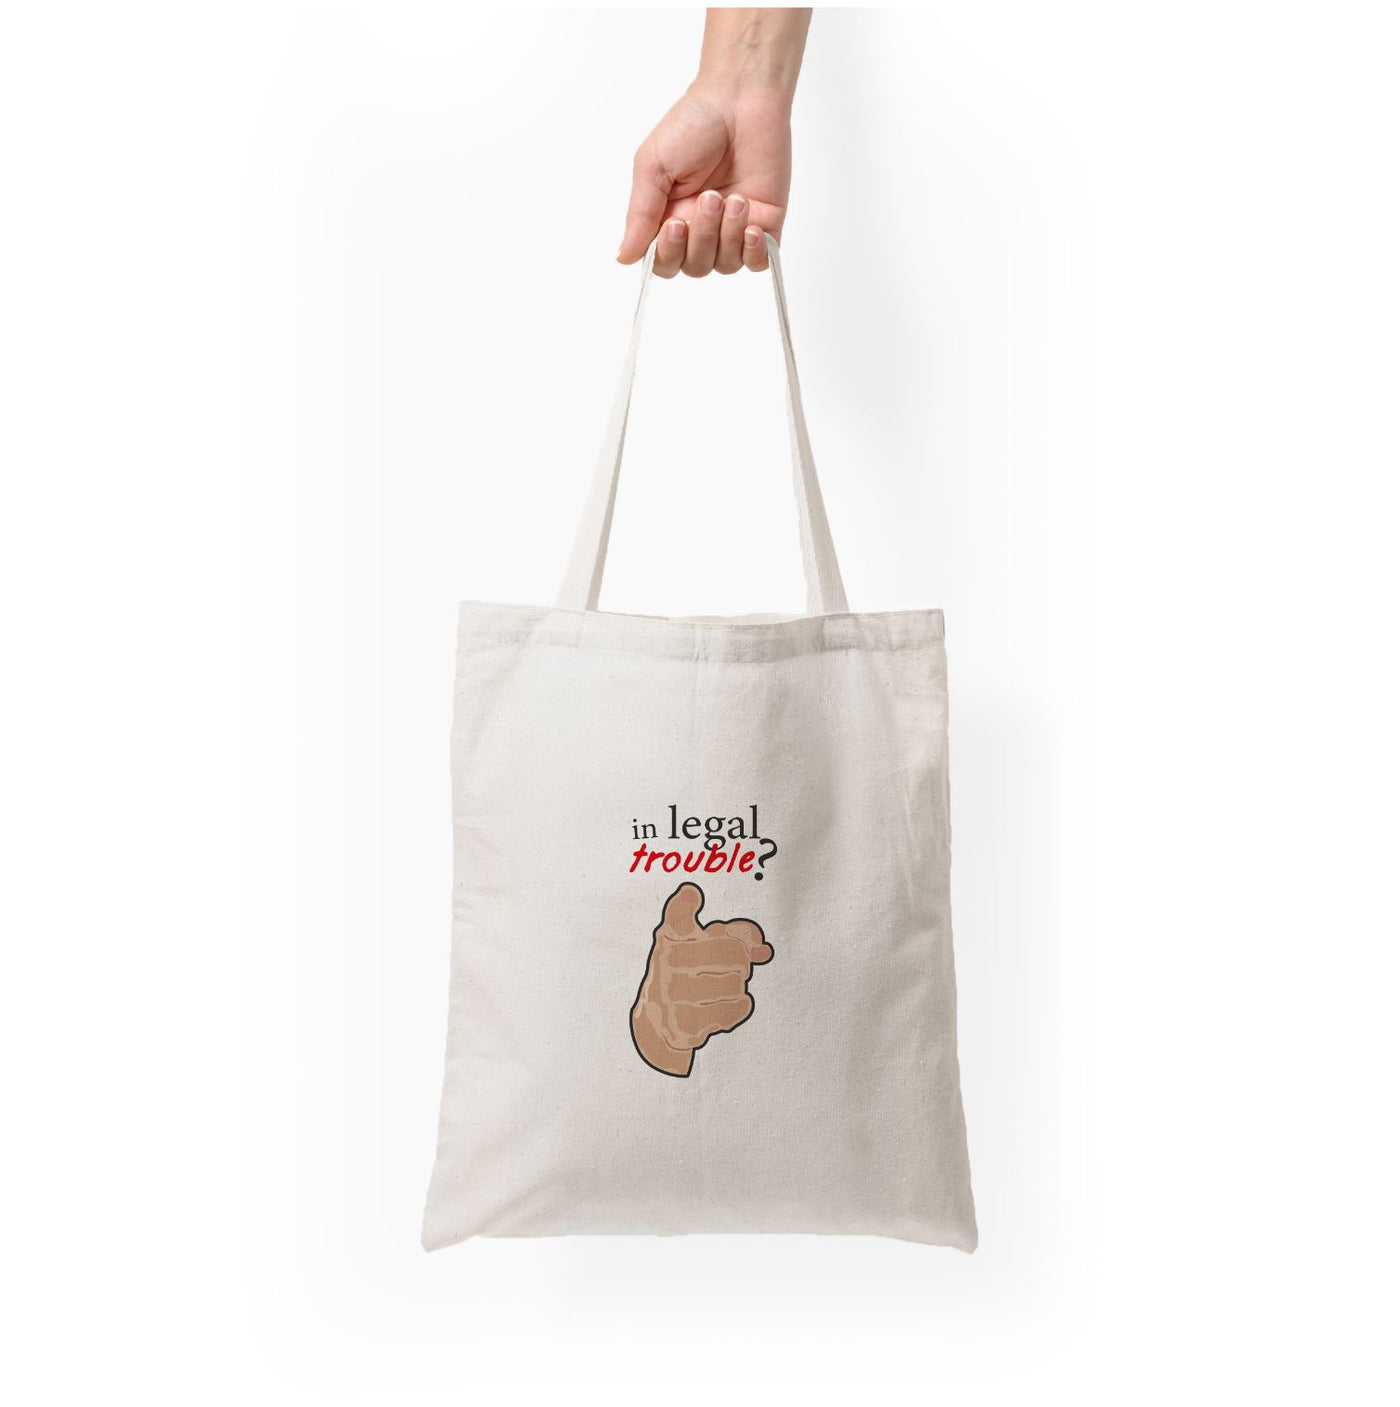 In Legal Trouble? - Better Call Saul Tote Bag